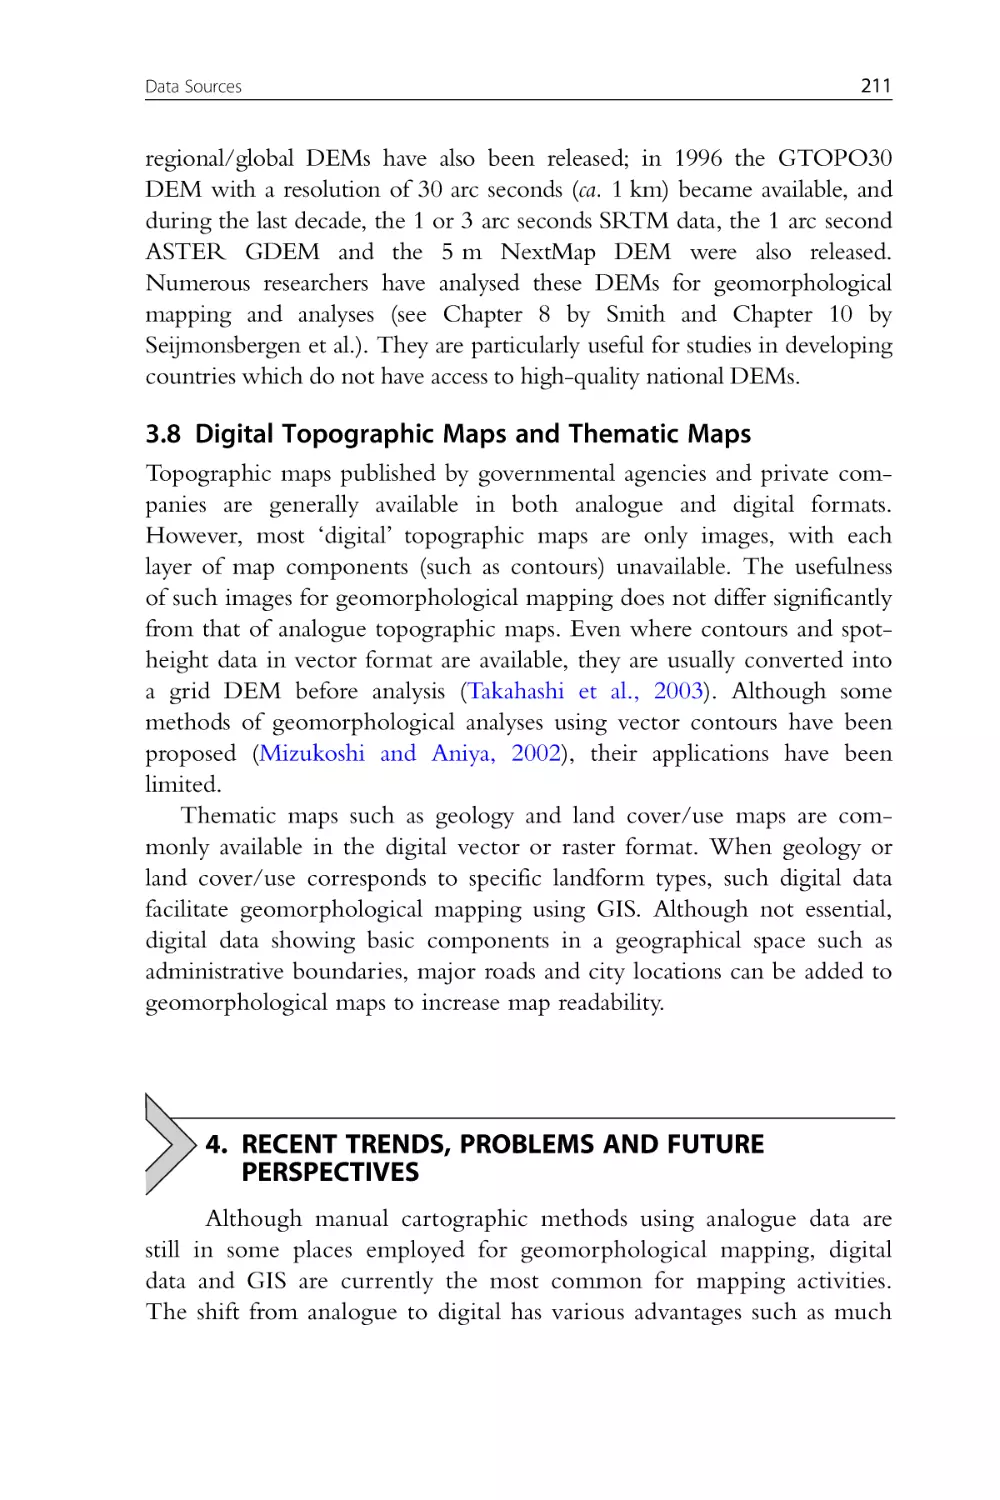 3.8 Digital Topographic Maps and Thematic Maps
4. Recent Trends, Problems and Future Perspectives